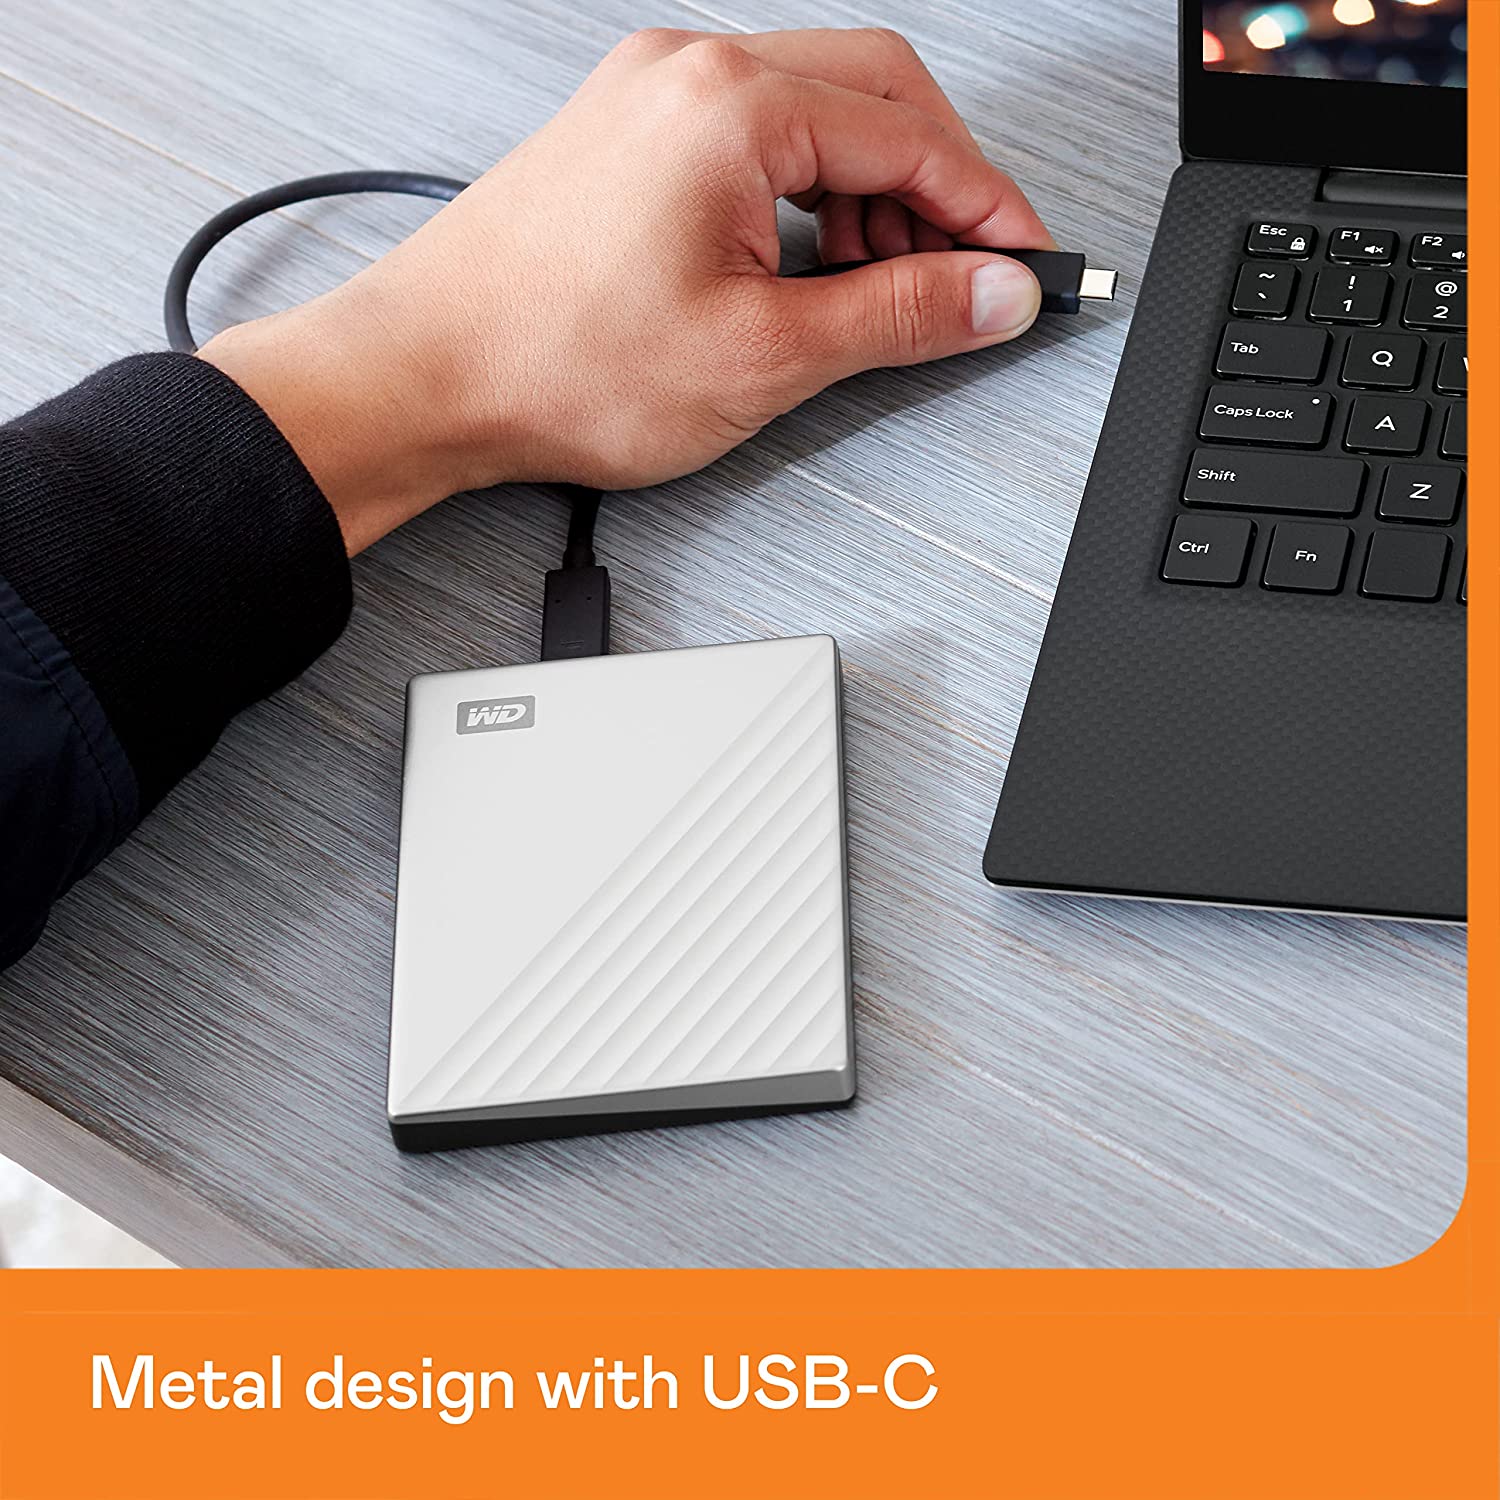 WD 2TB My Passport Portable Hard Disk Drive With USB C & USB3.1 For Windows & Mac-Silver